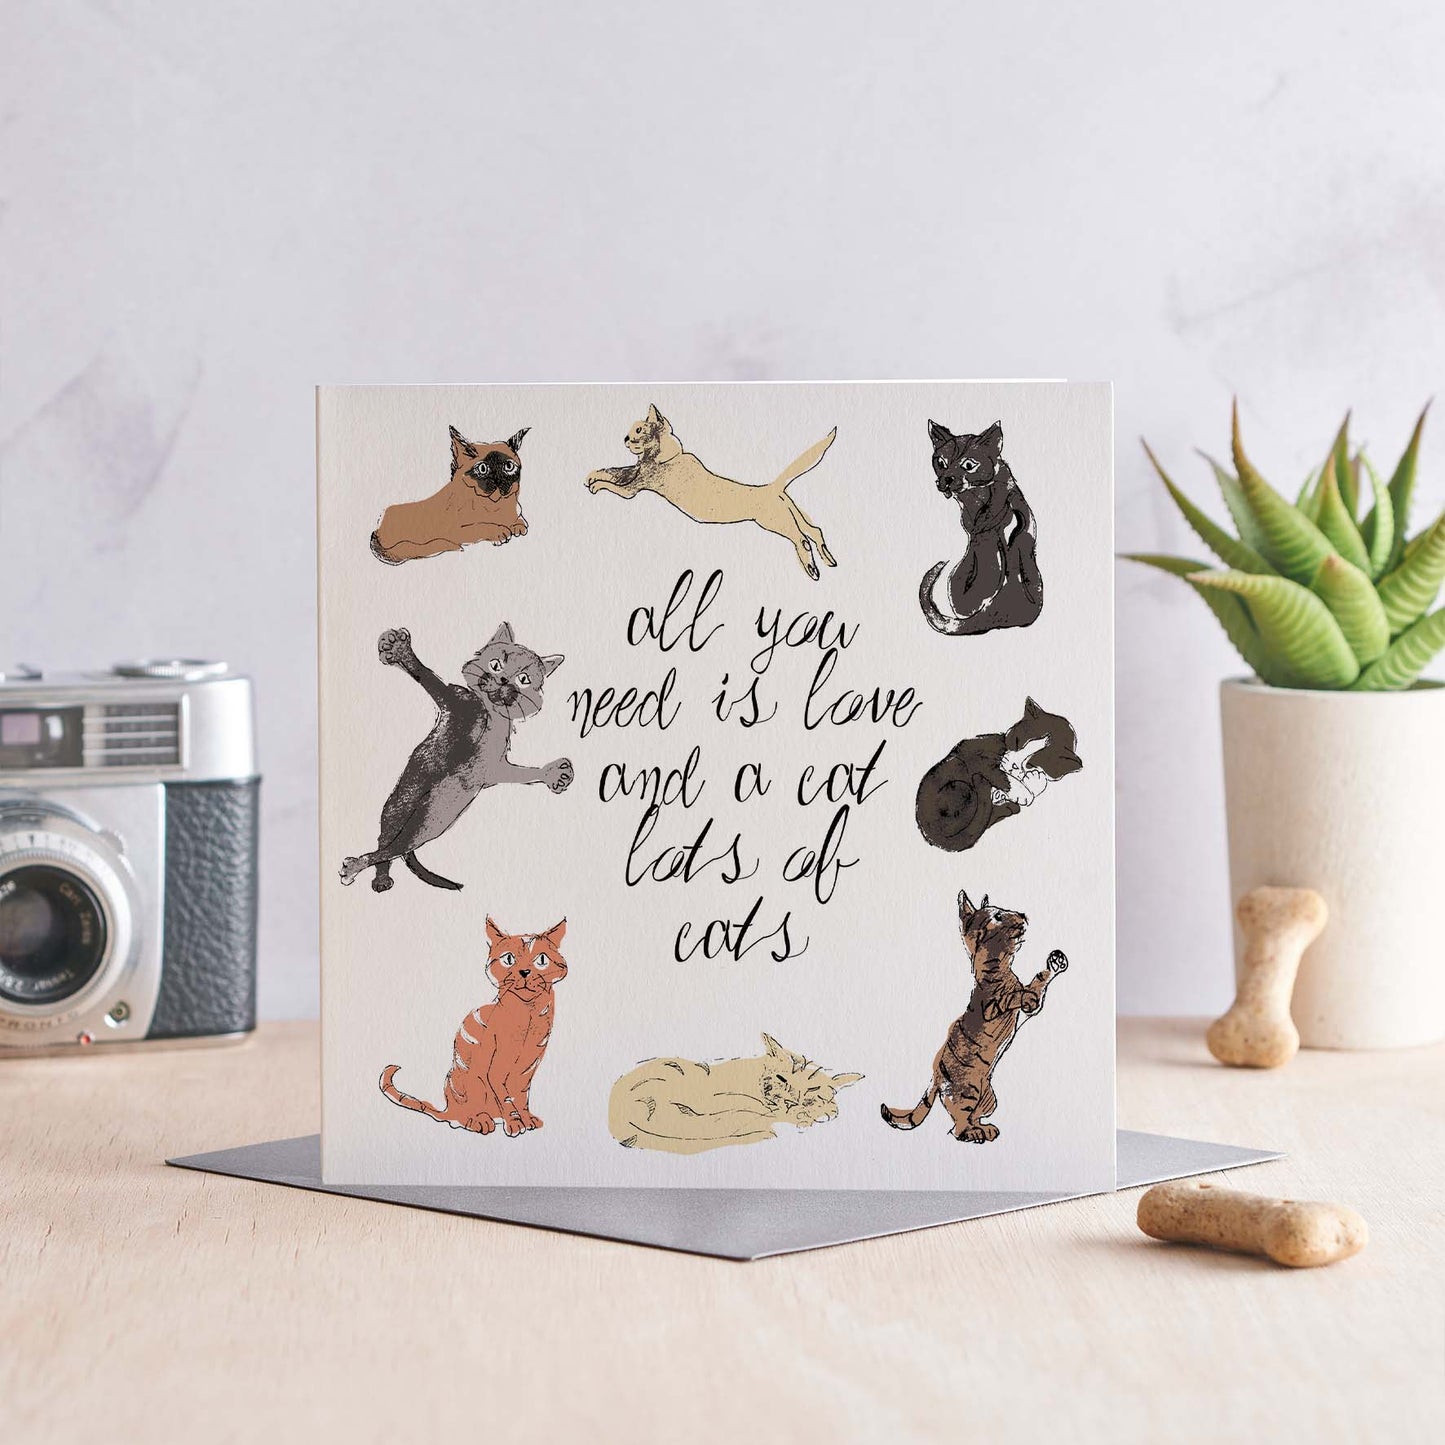 Load image into Gallery viewer, All you need is love and a cat, lots of cats - Greeting Card
